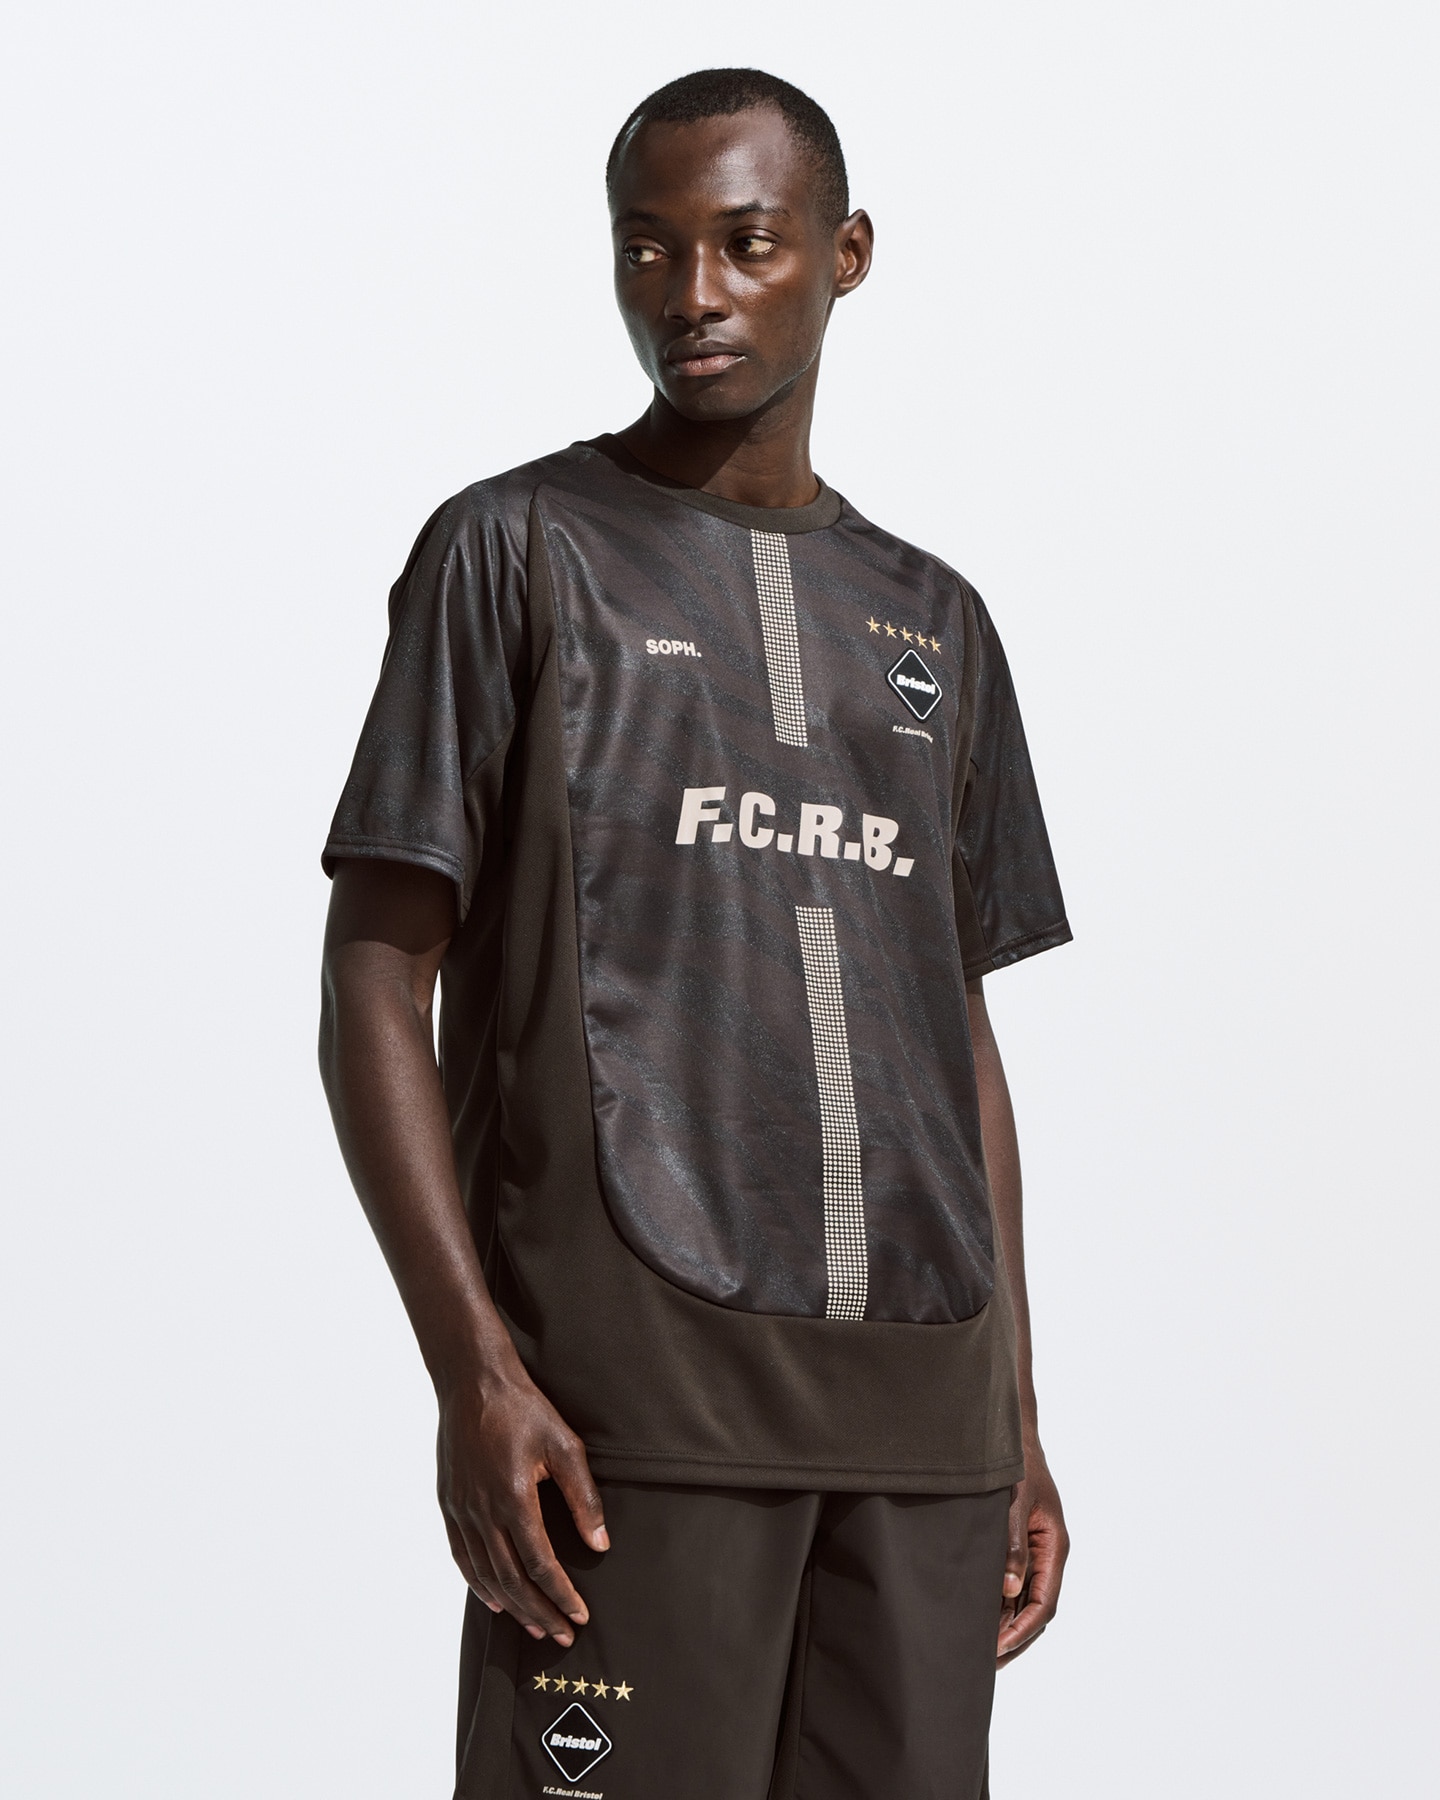 S 新品 送料無料 FCRB 22SS S/S PRE MATCH TOP